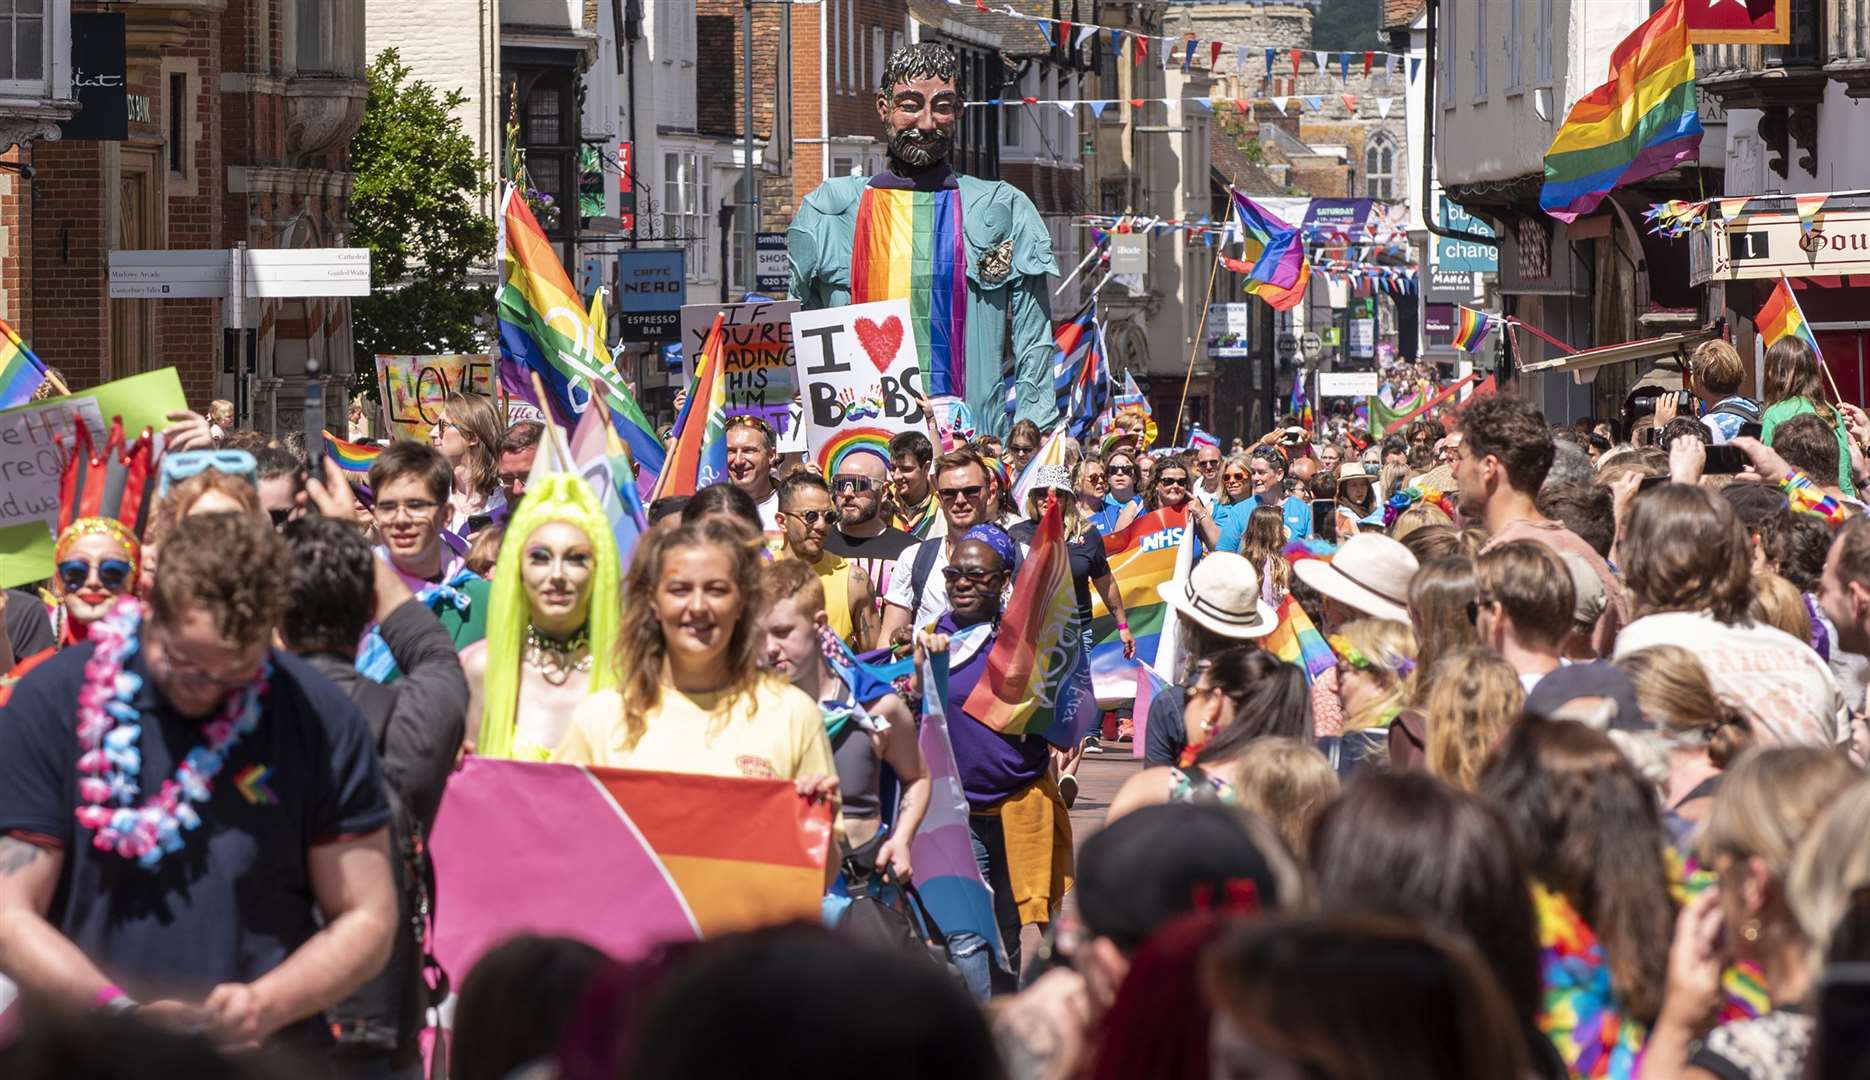 Today marked one of the city's biggest events in recent years. Picture: Jo Court